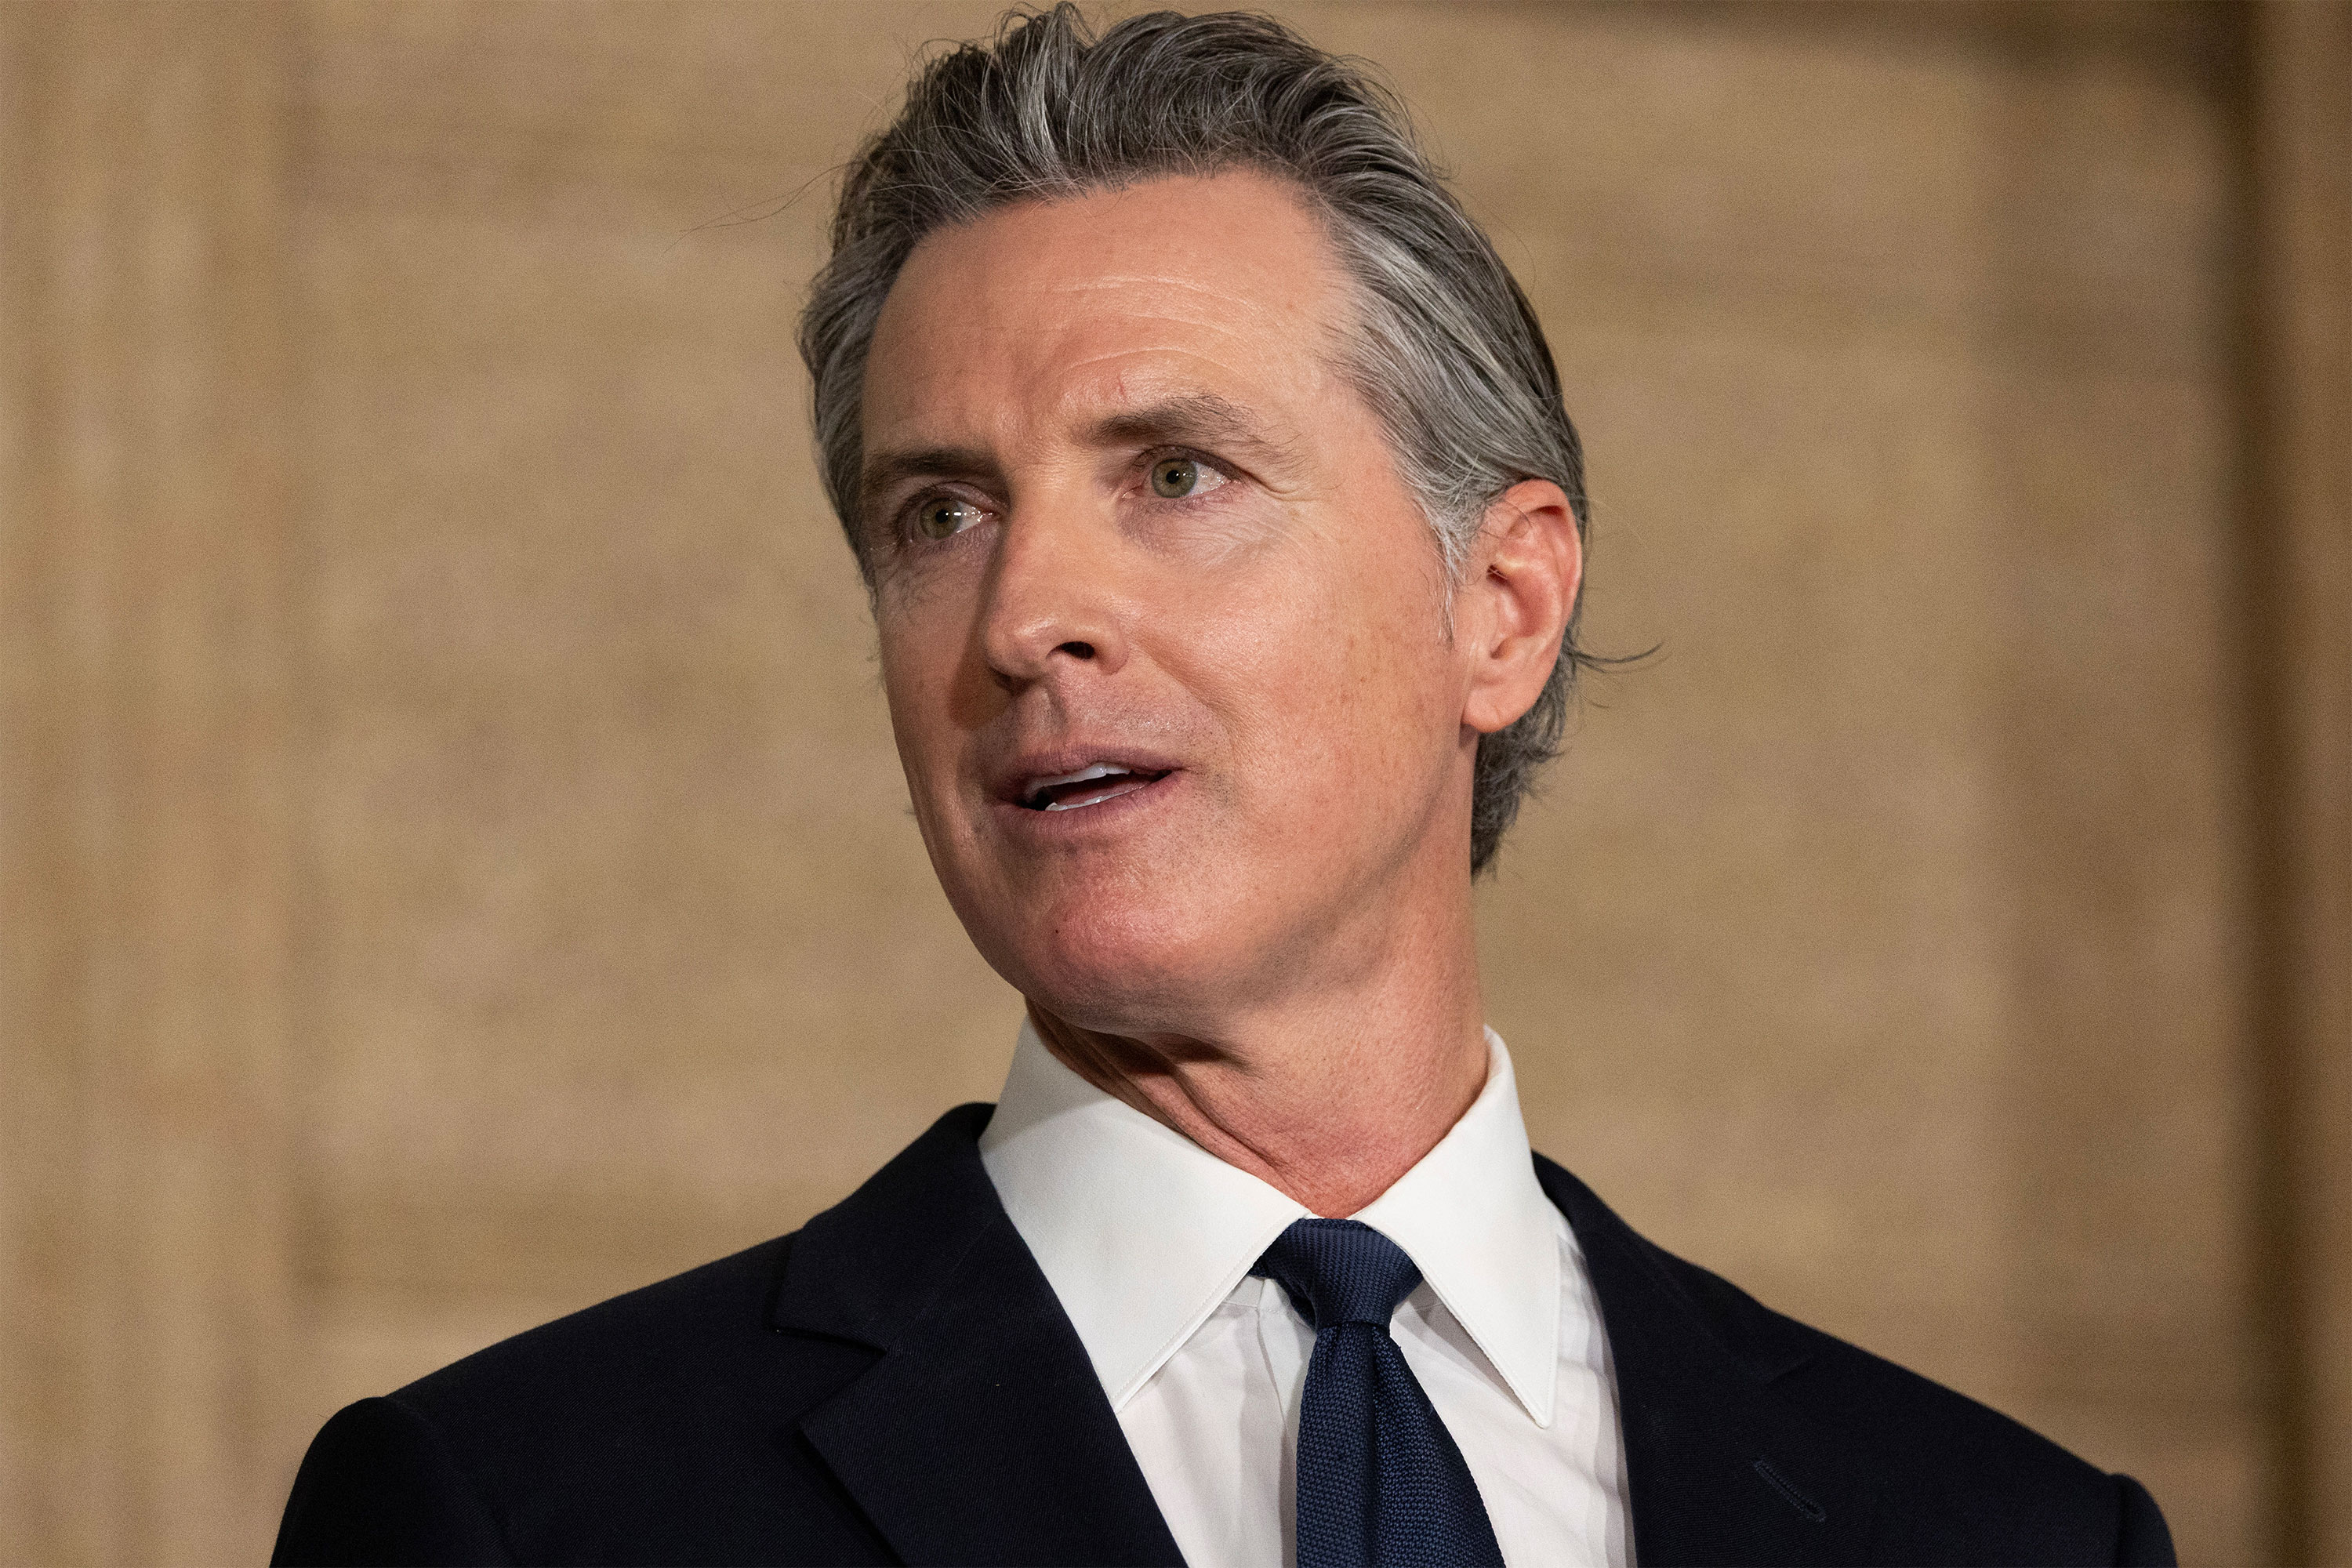 Image for display with article titled Newsom Boosted California’s Public Health Budget During Covid. Now He Wants to Cut It.